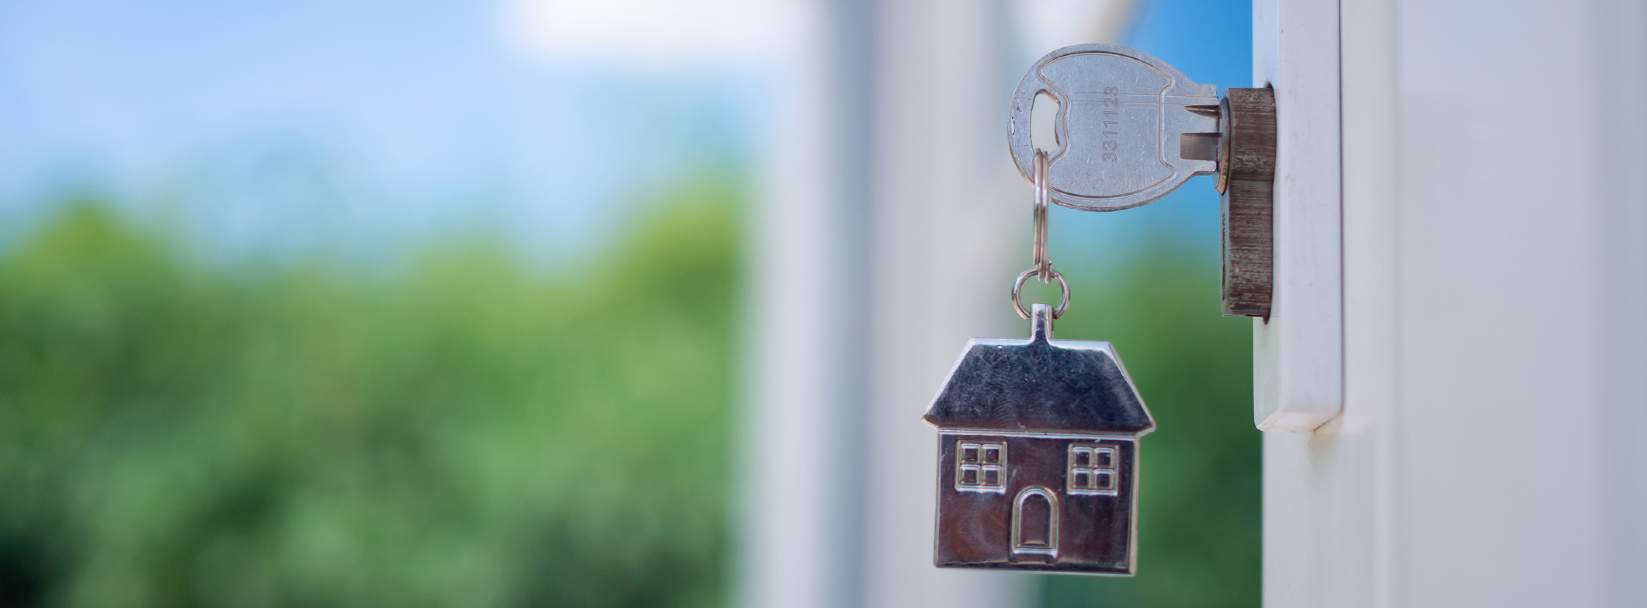 Oiling the chain – Top tips for buying or selling a home in the current market